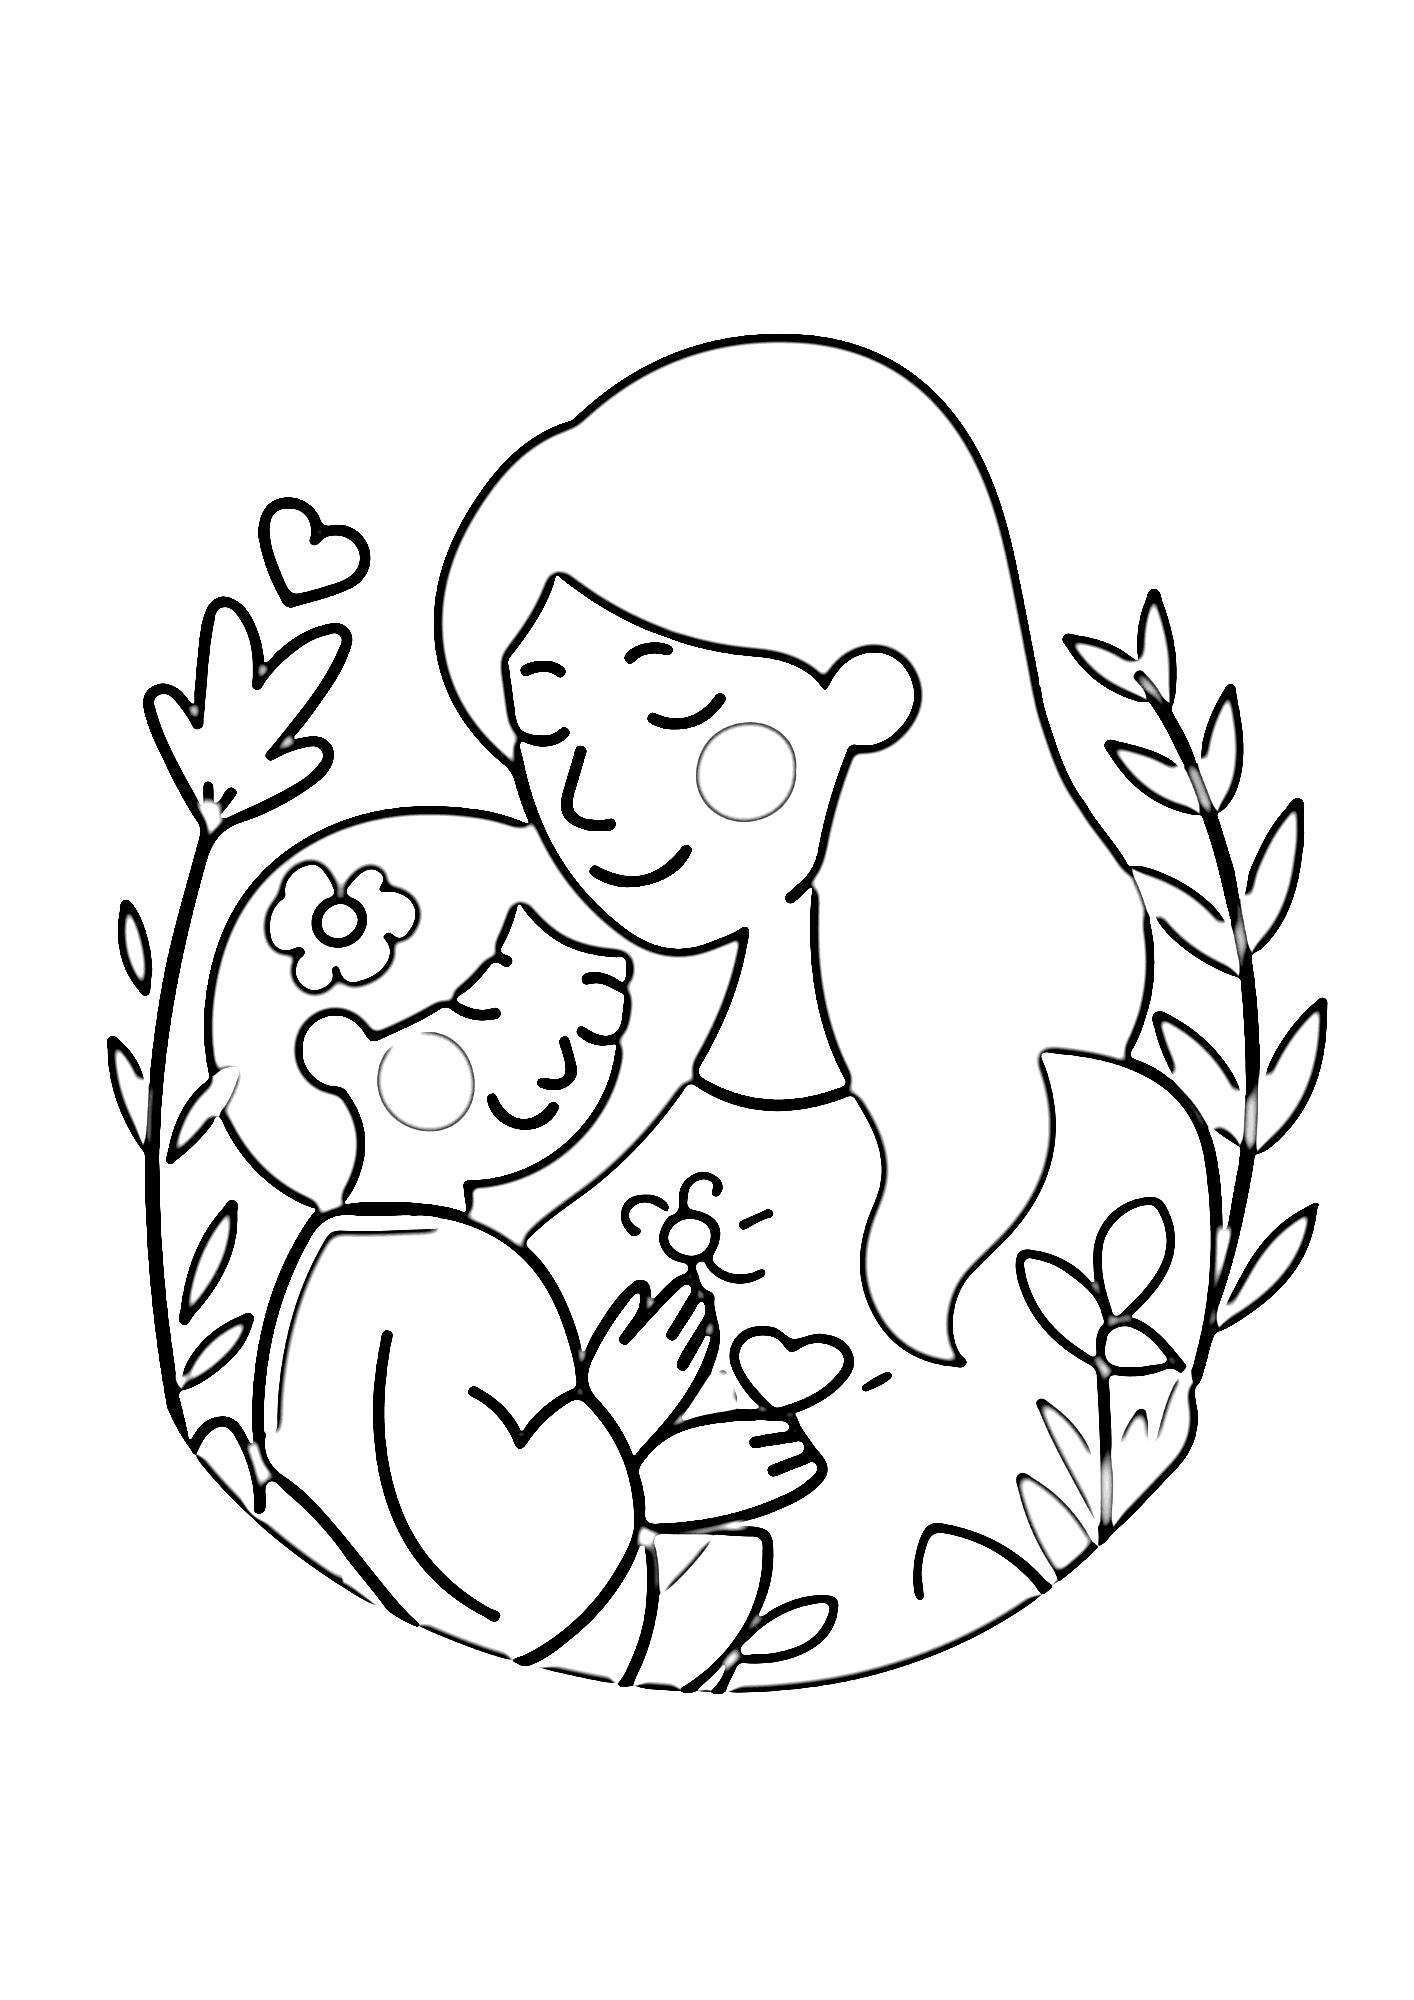 Mother's Day Drawing Coloring Pages